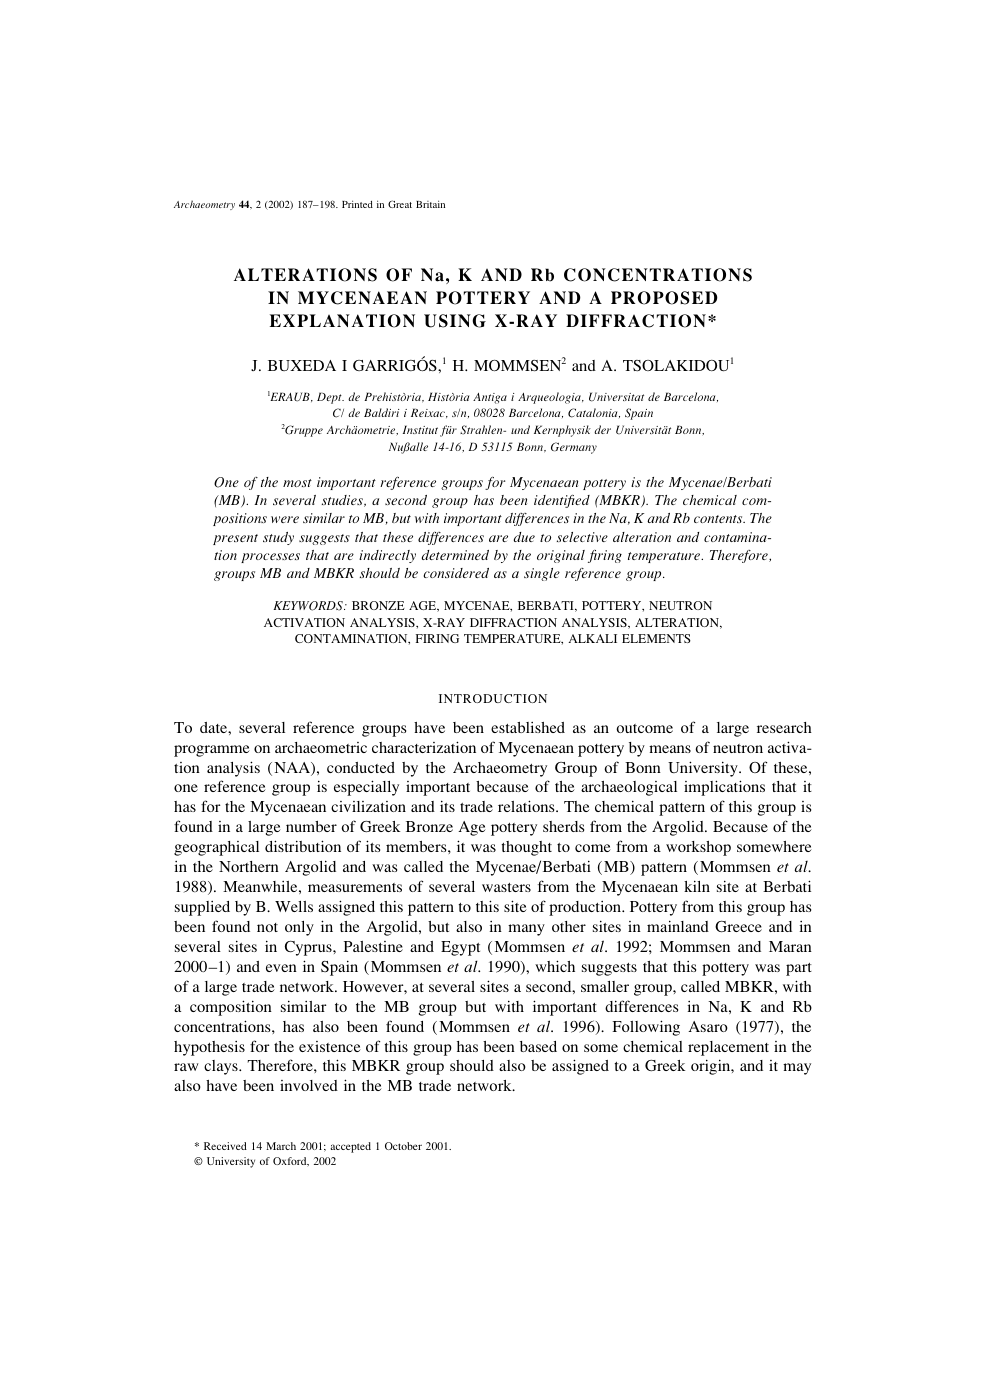 Alterations Of Na K And Rb Concentrations In Mycenaean Pottery And A Proposed Explanation Using X Ray Diffraction Topic Of Research Paper In History And Archaeology Download Scholarly Article Pdf And Read